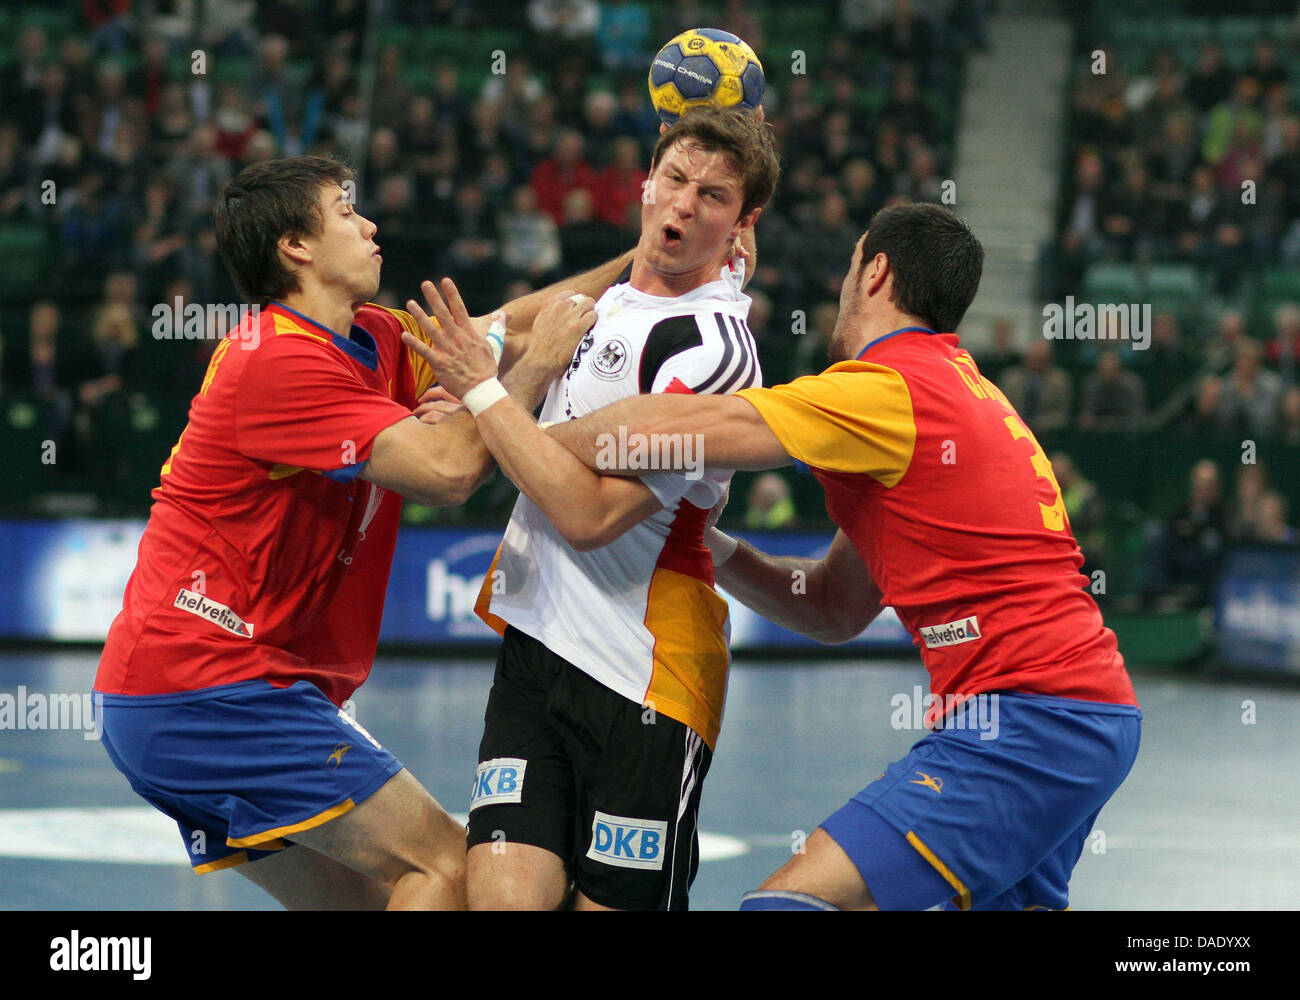 Germany's Martin Strobel (M) and Spain's Christian Ugalde and Gedeon Guardiola (R) vie for the ball during Handball Supercup match Germany vs Spain at Gerry Weber Stadium in Halle, Germany, 06 November 2011. Photo: Oliver Krato Stock Photo